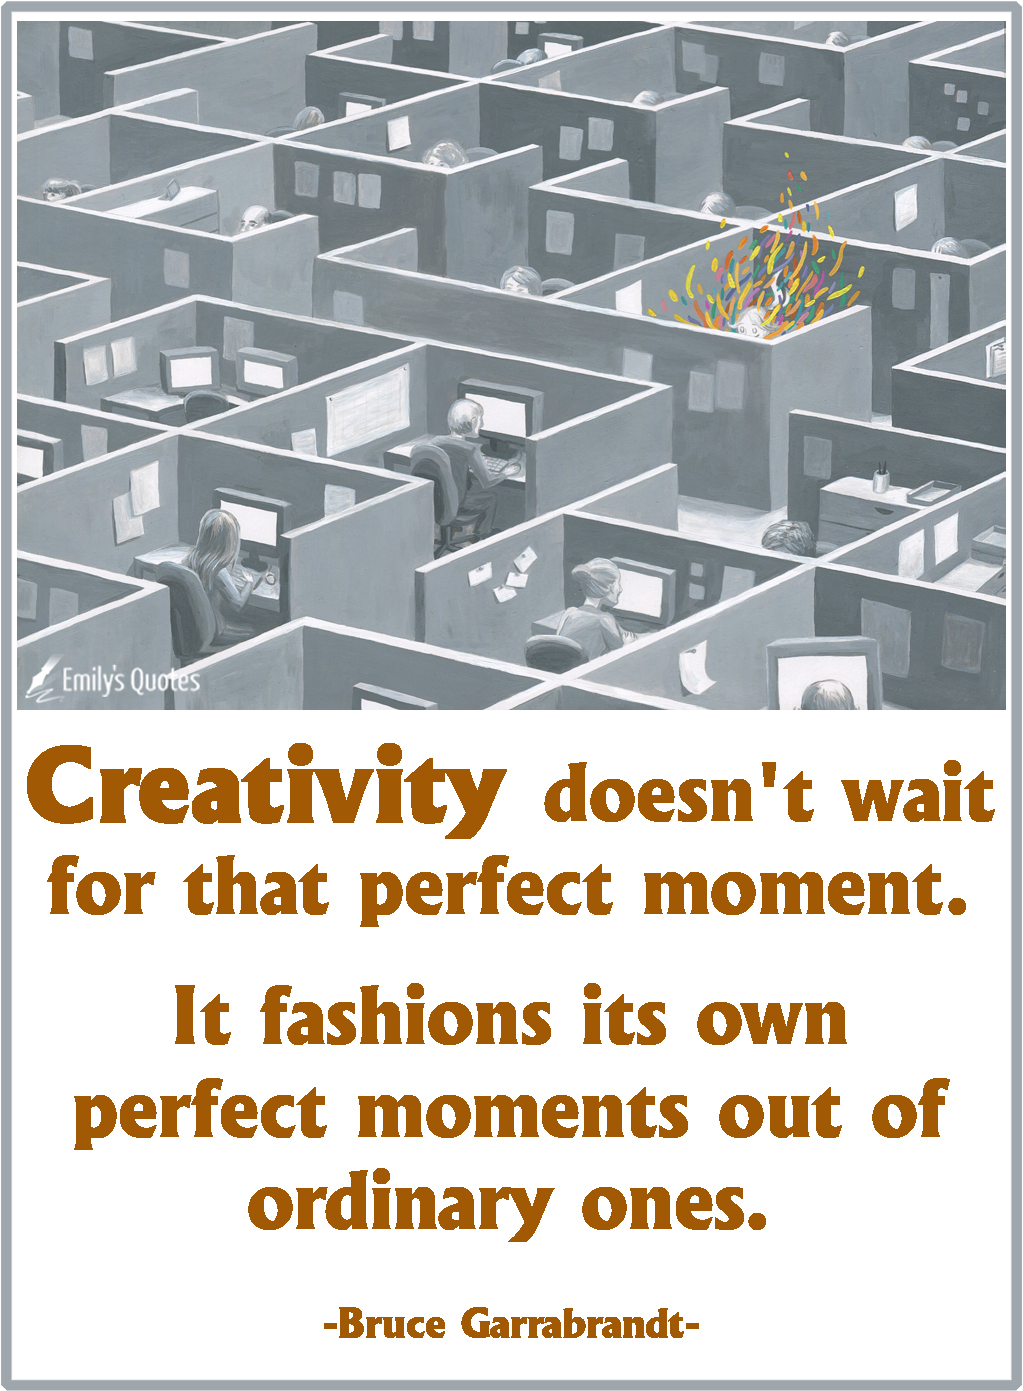 Creativity doesn’t wait for that perfect moment. It fashions its own perfect moments